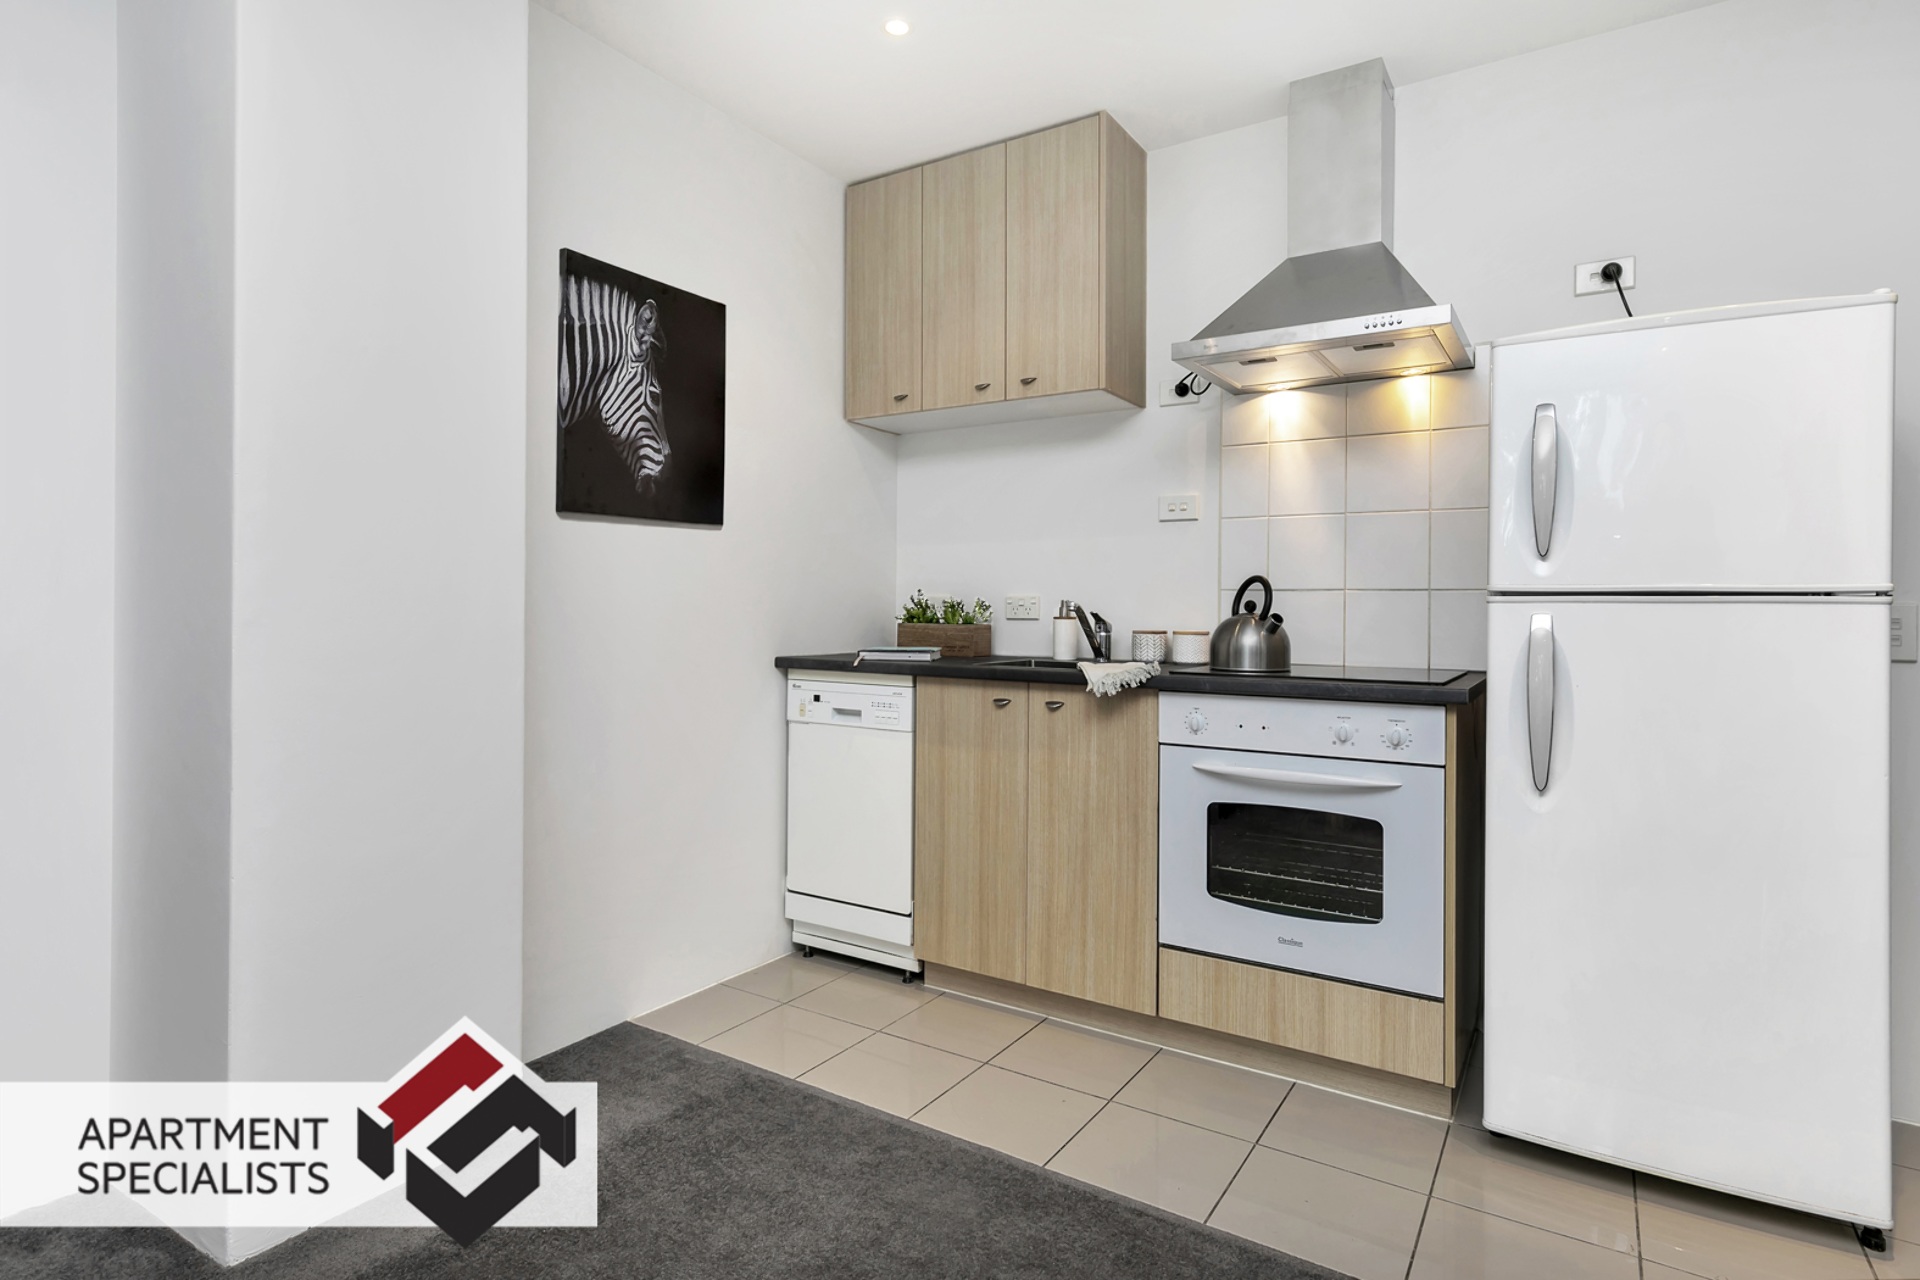 3 | 10 Ronayne Street, Parnell | Apartment Specialists